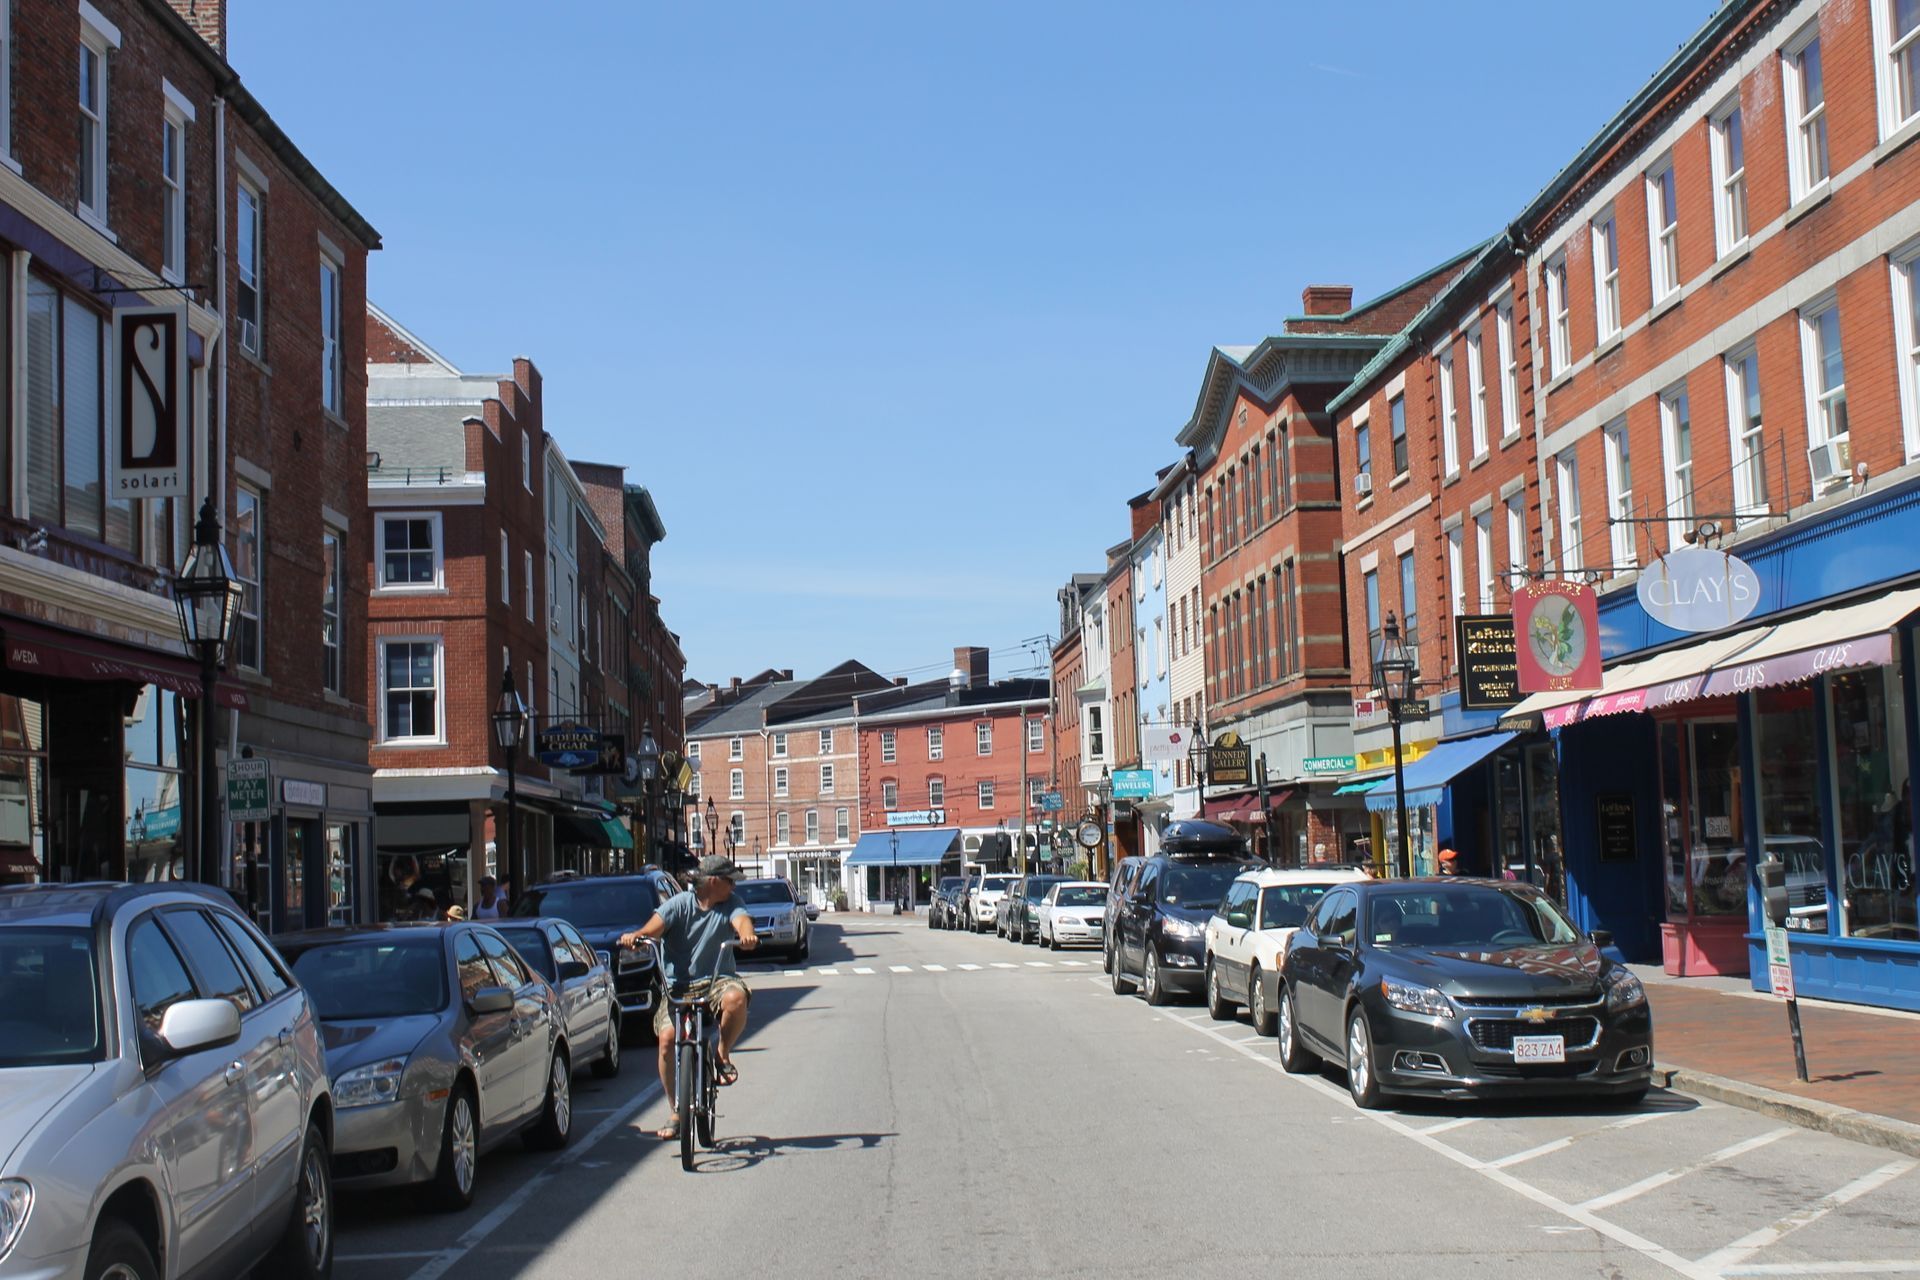 Market Street, downtown Portsmouth, New Hampshire.